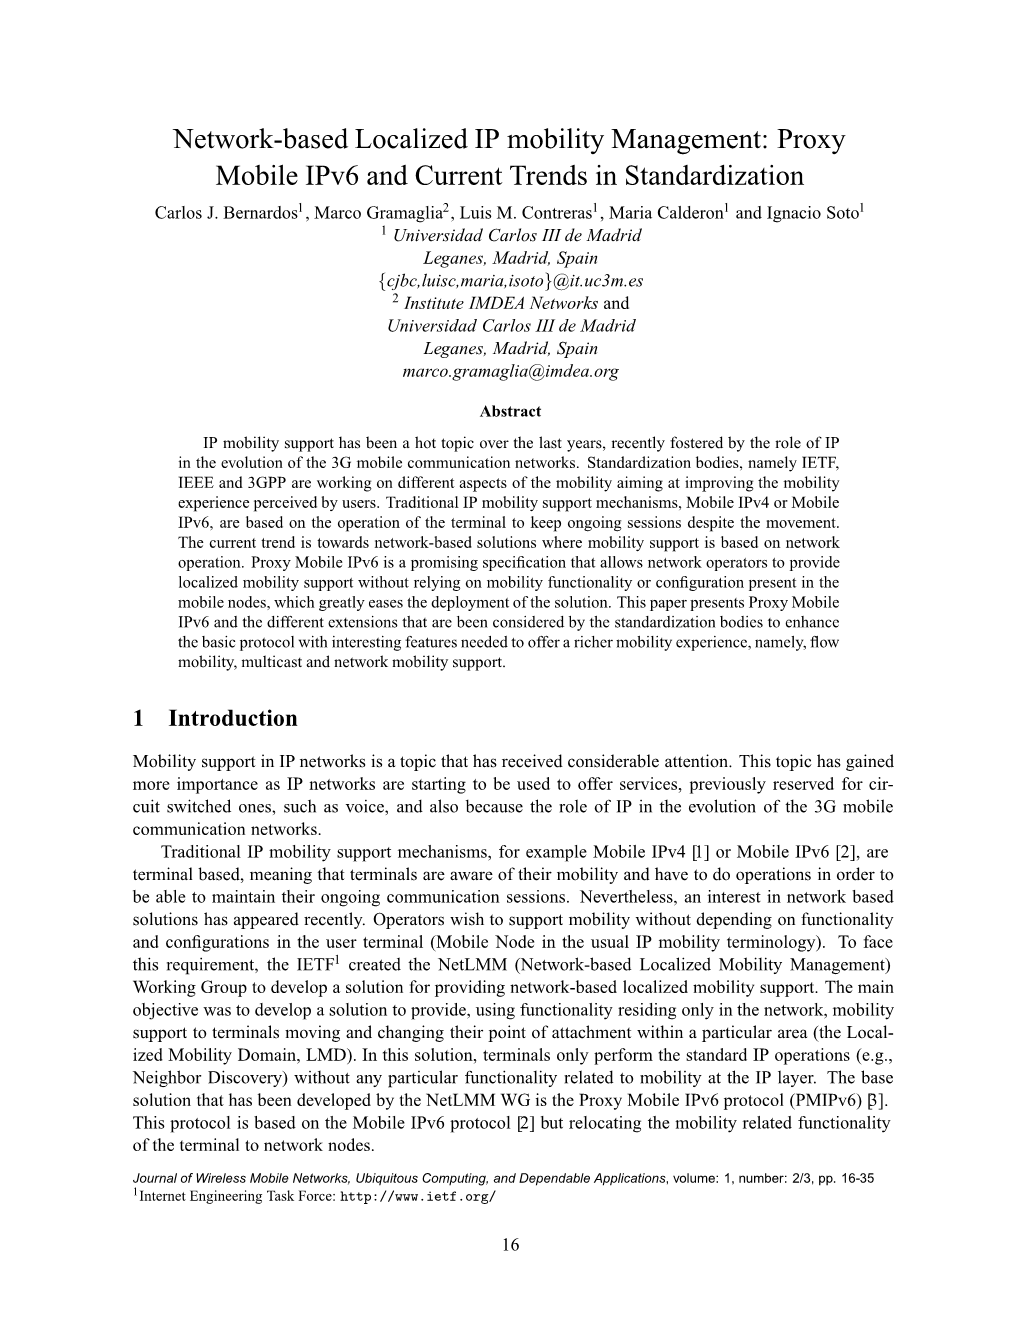 Network-Based Localized IP Mobility Management: Proxy Mobile Ipv6 and Current Trends in Standardization Carlos J